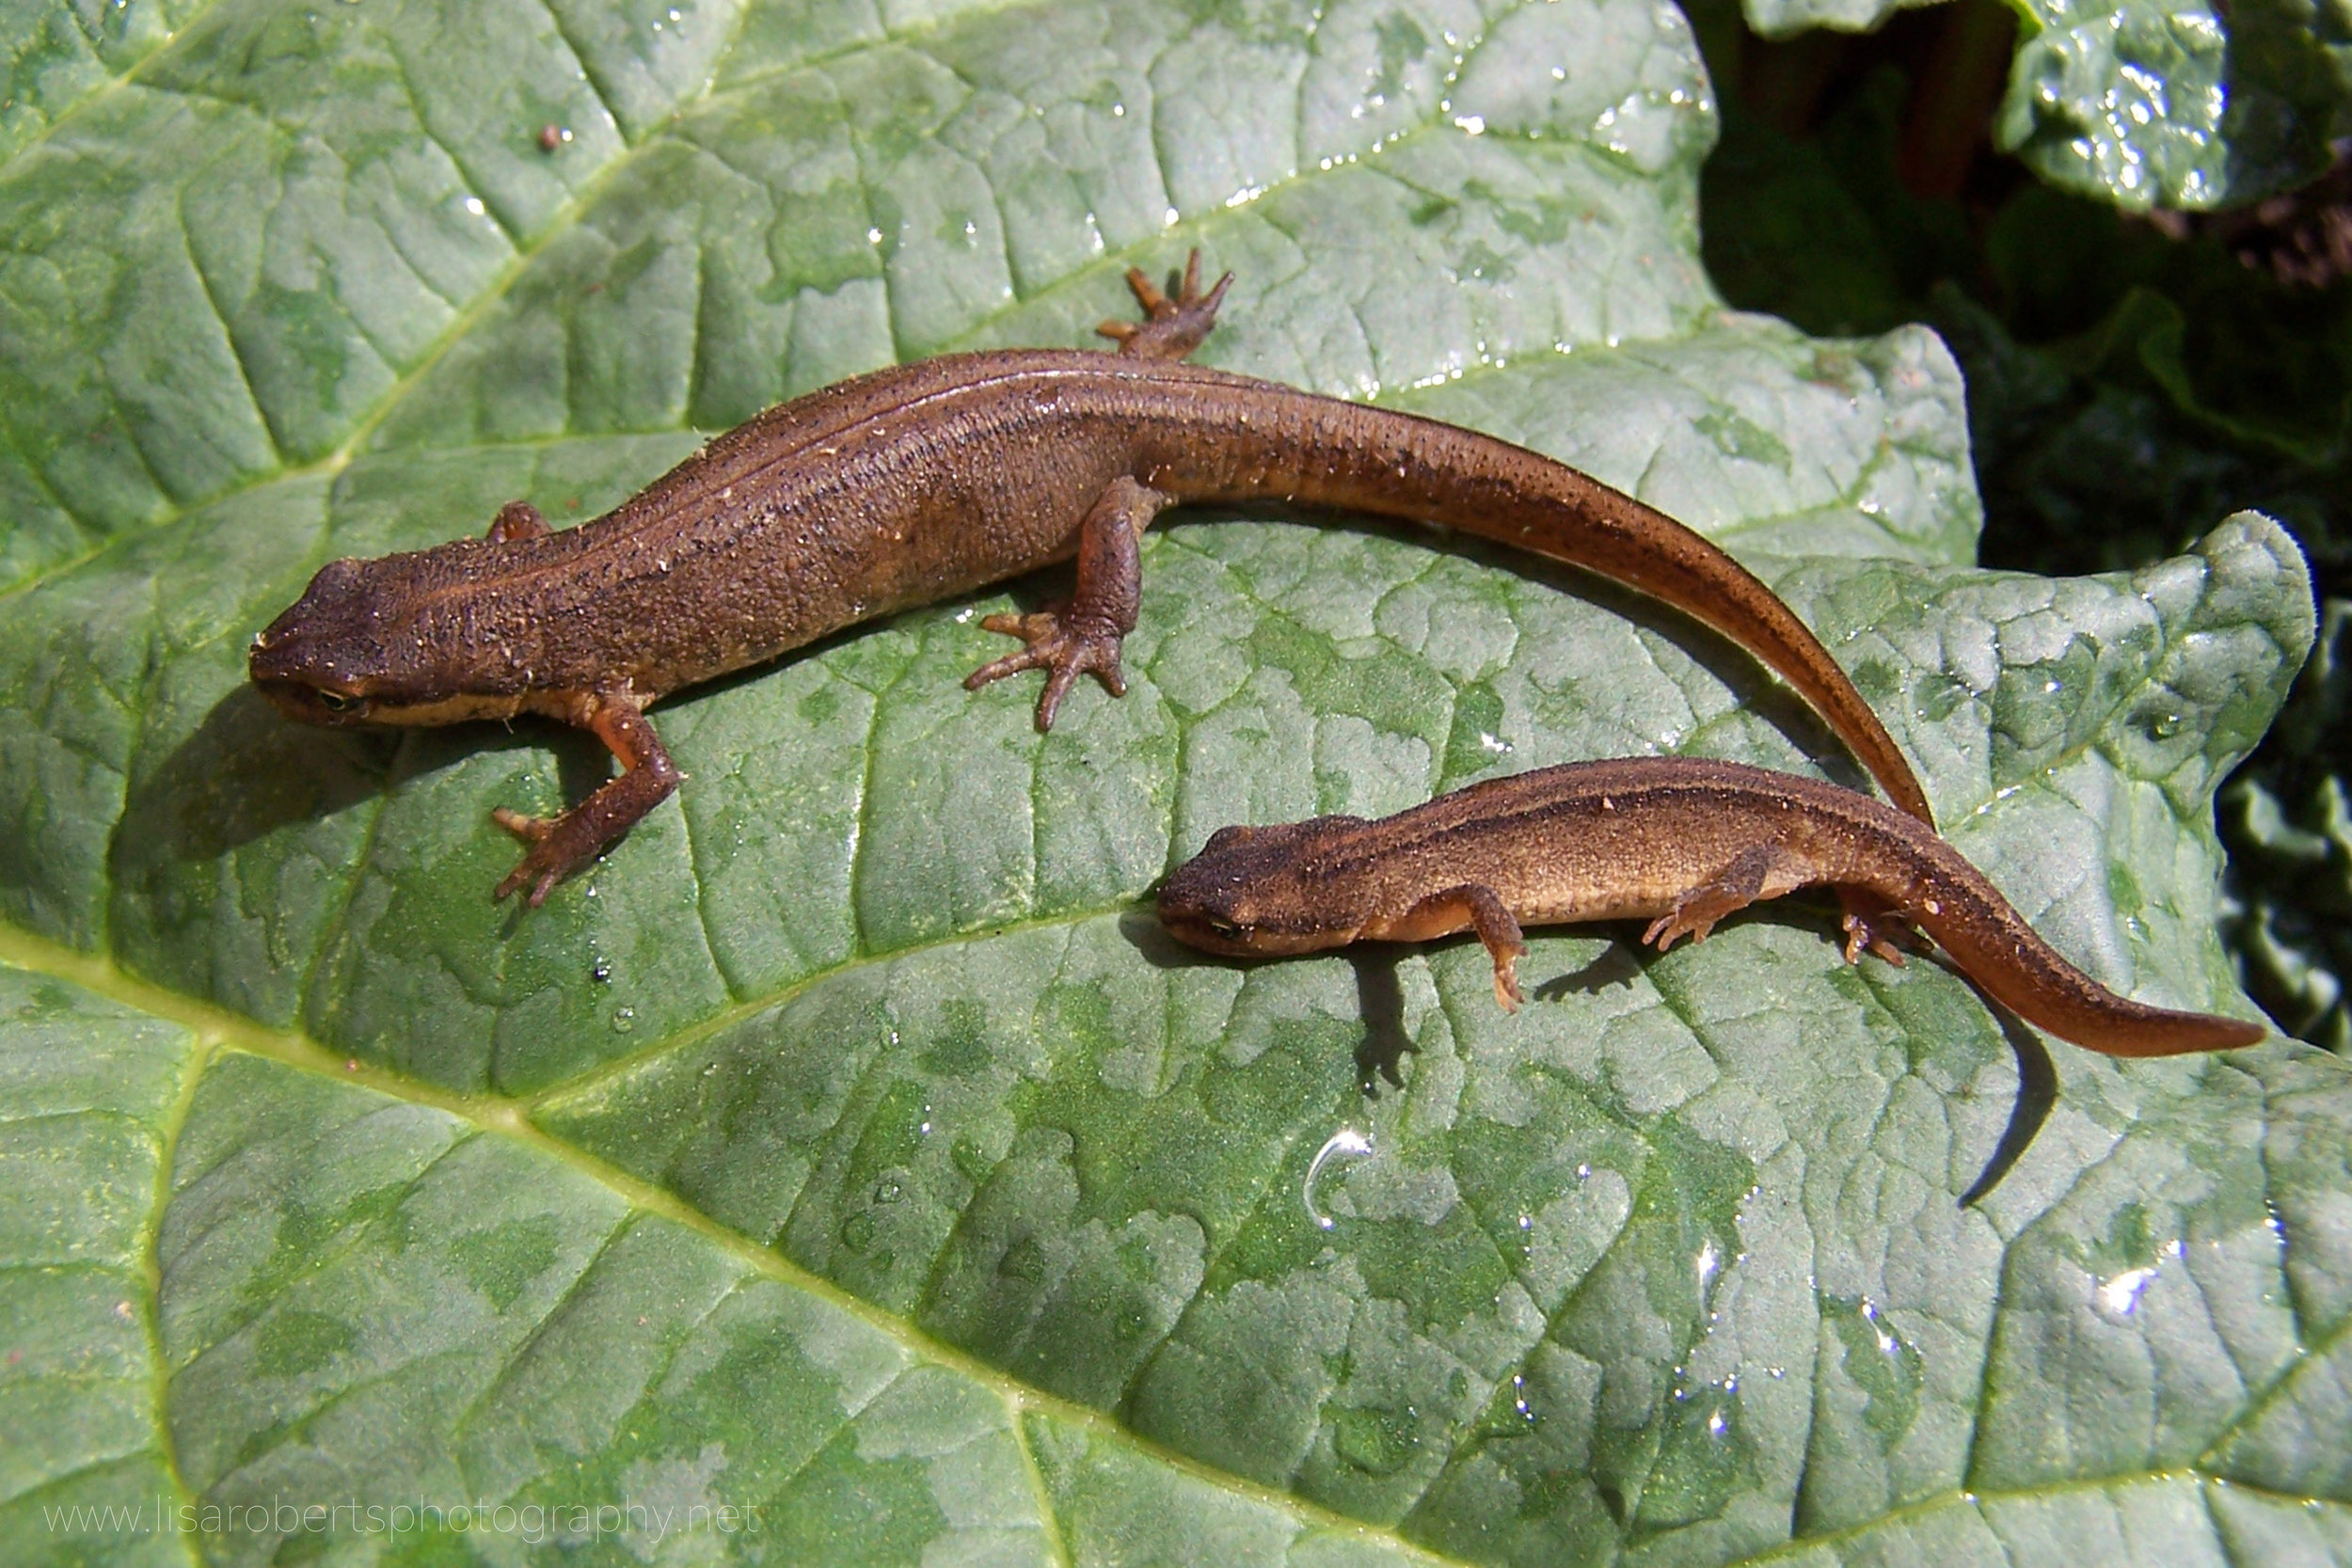  Female Smooth Newt with young 